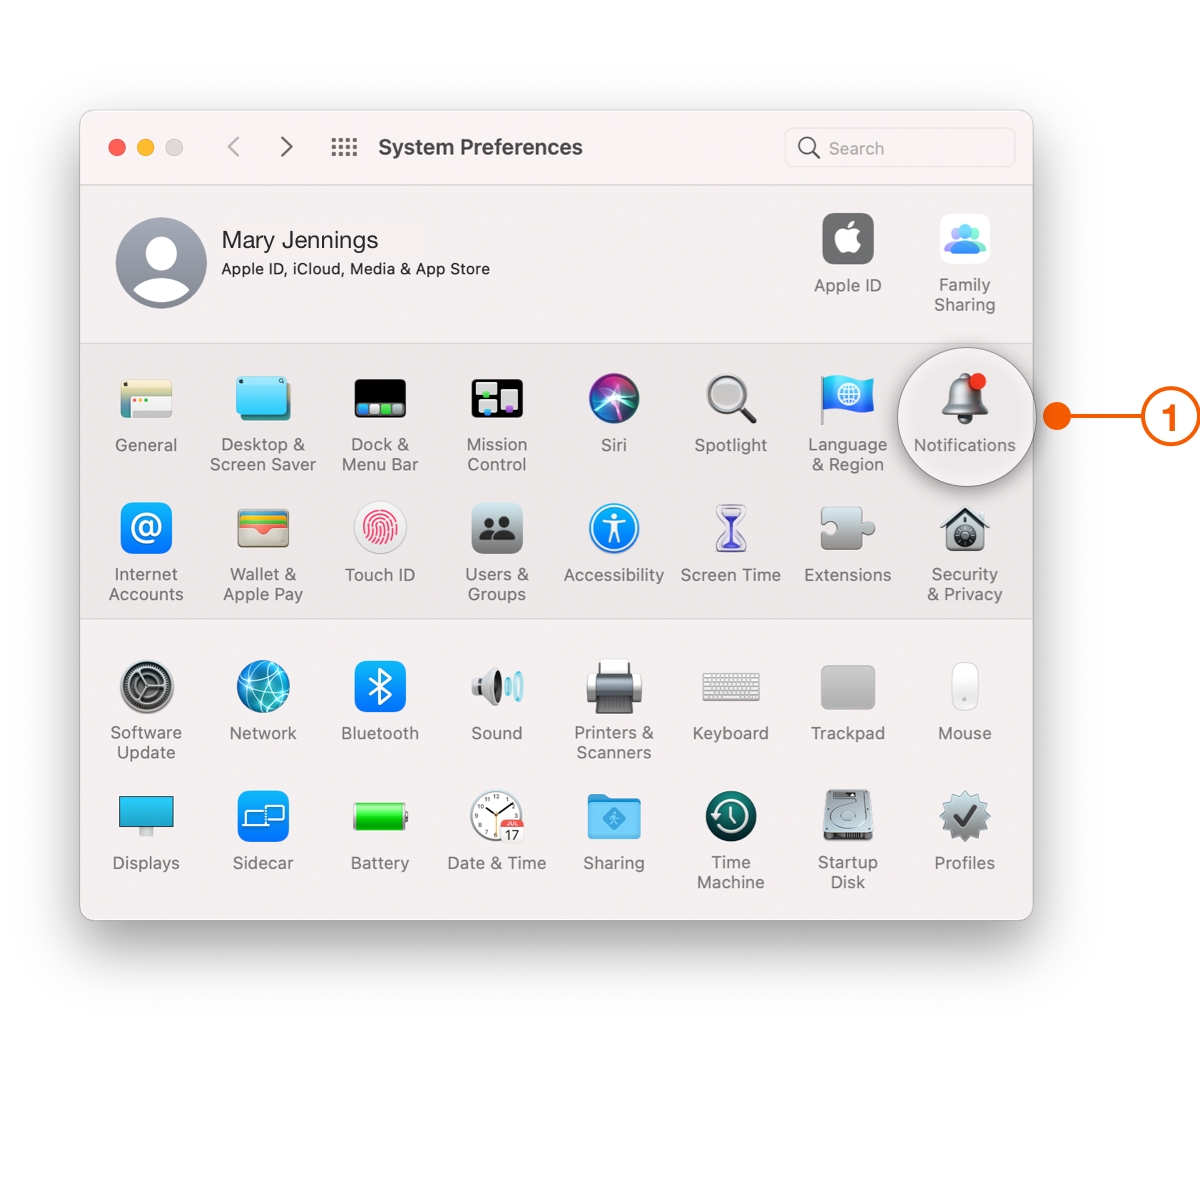 macOS System Preferences window selecting Notifications